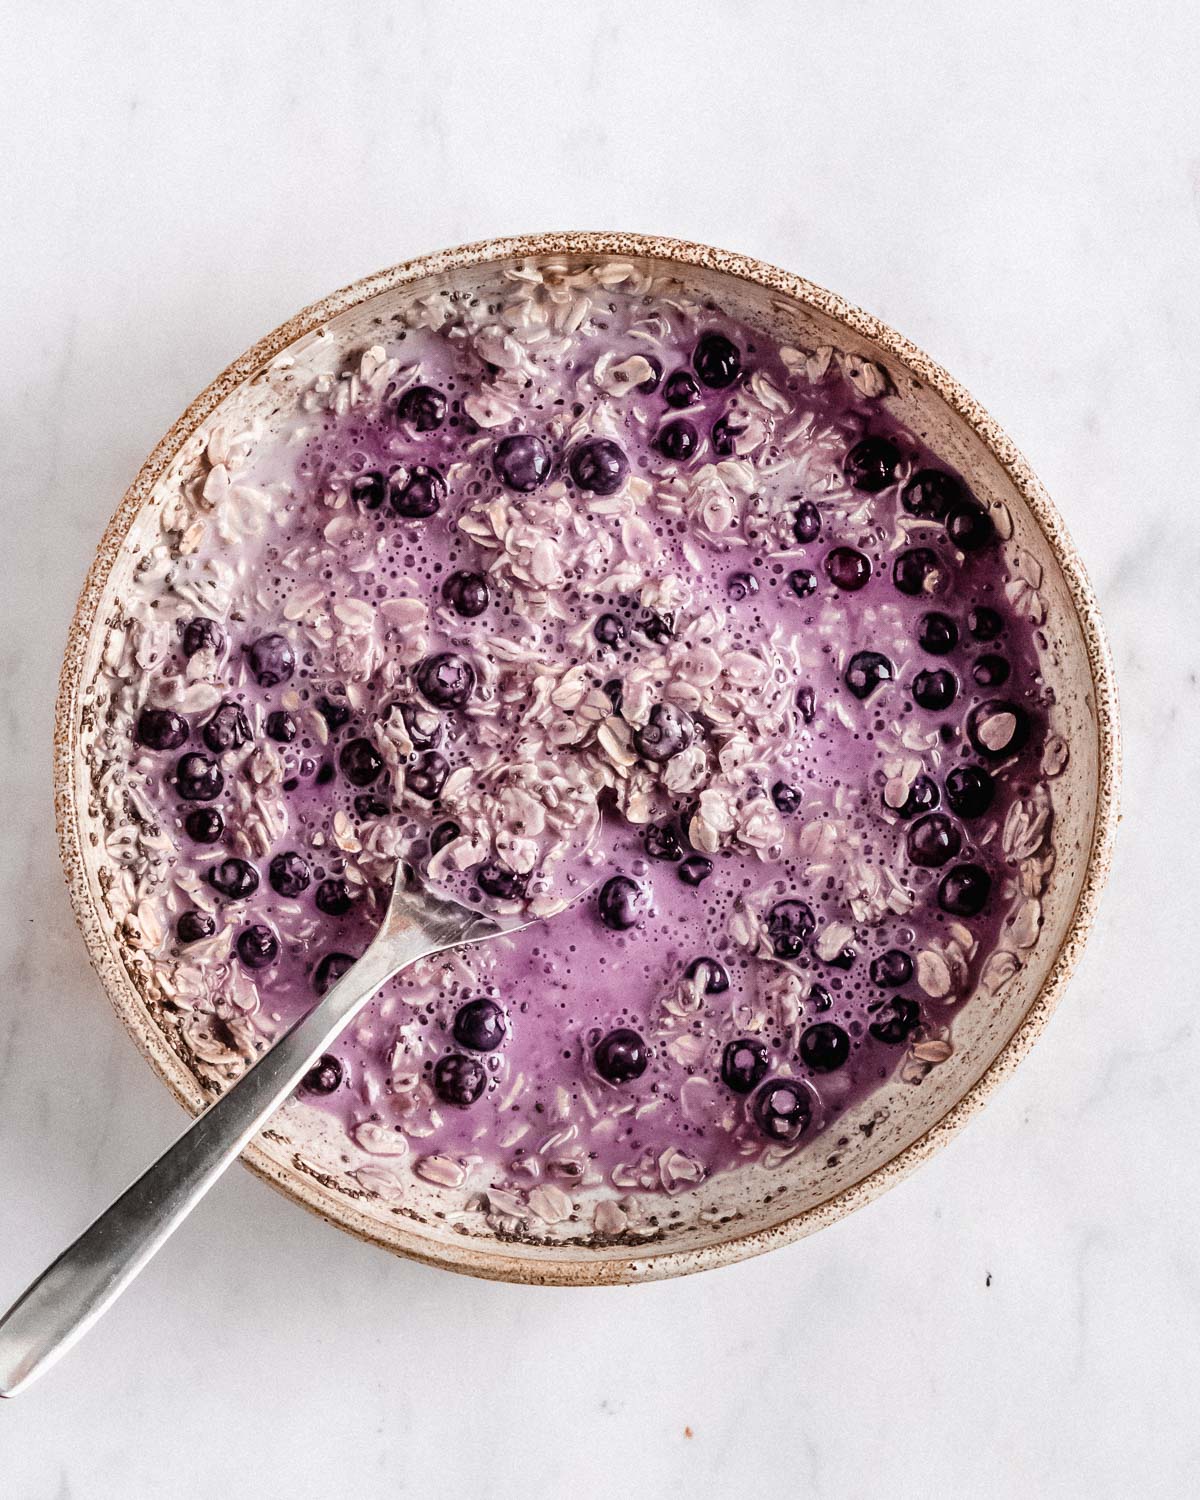 plant milk, yogurt, rolled oats, chia seeds, maple syrup and frozen berries in a granola bowl mixed together